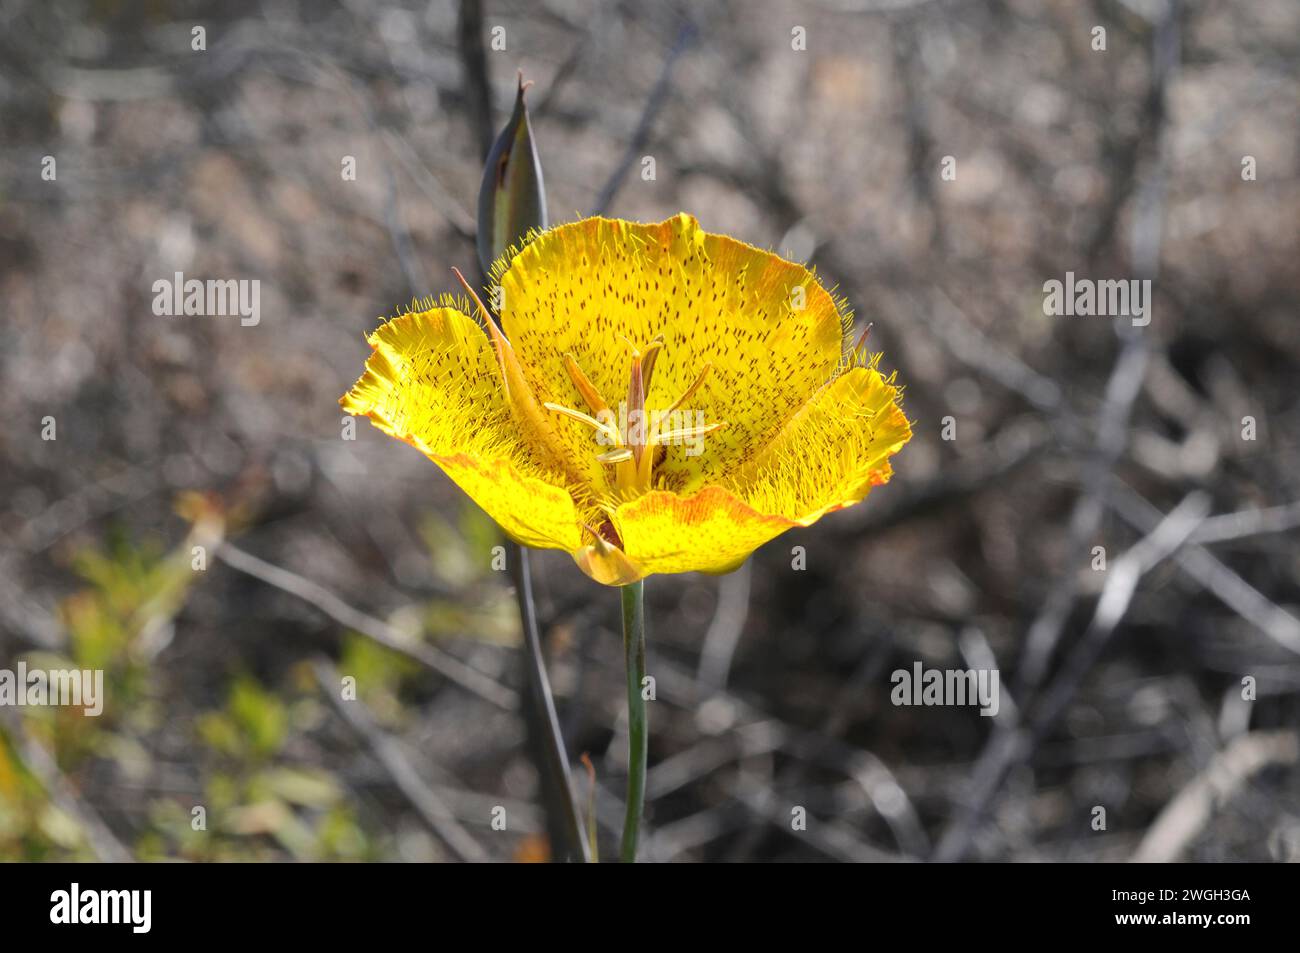 Weed's mariposa lily (Calochortus weedii) is a perennial herb native to California (USA) and Baja California (Mexico). This photo was taken in Torrey Stock Photo